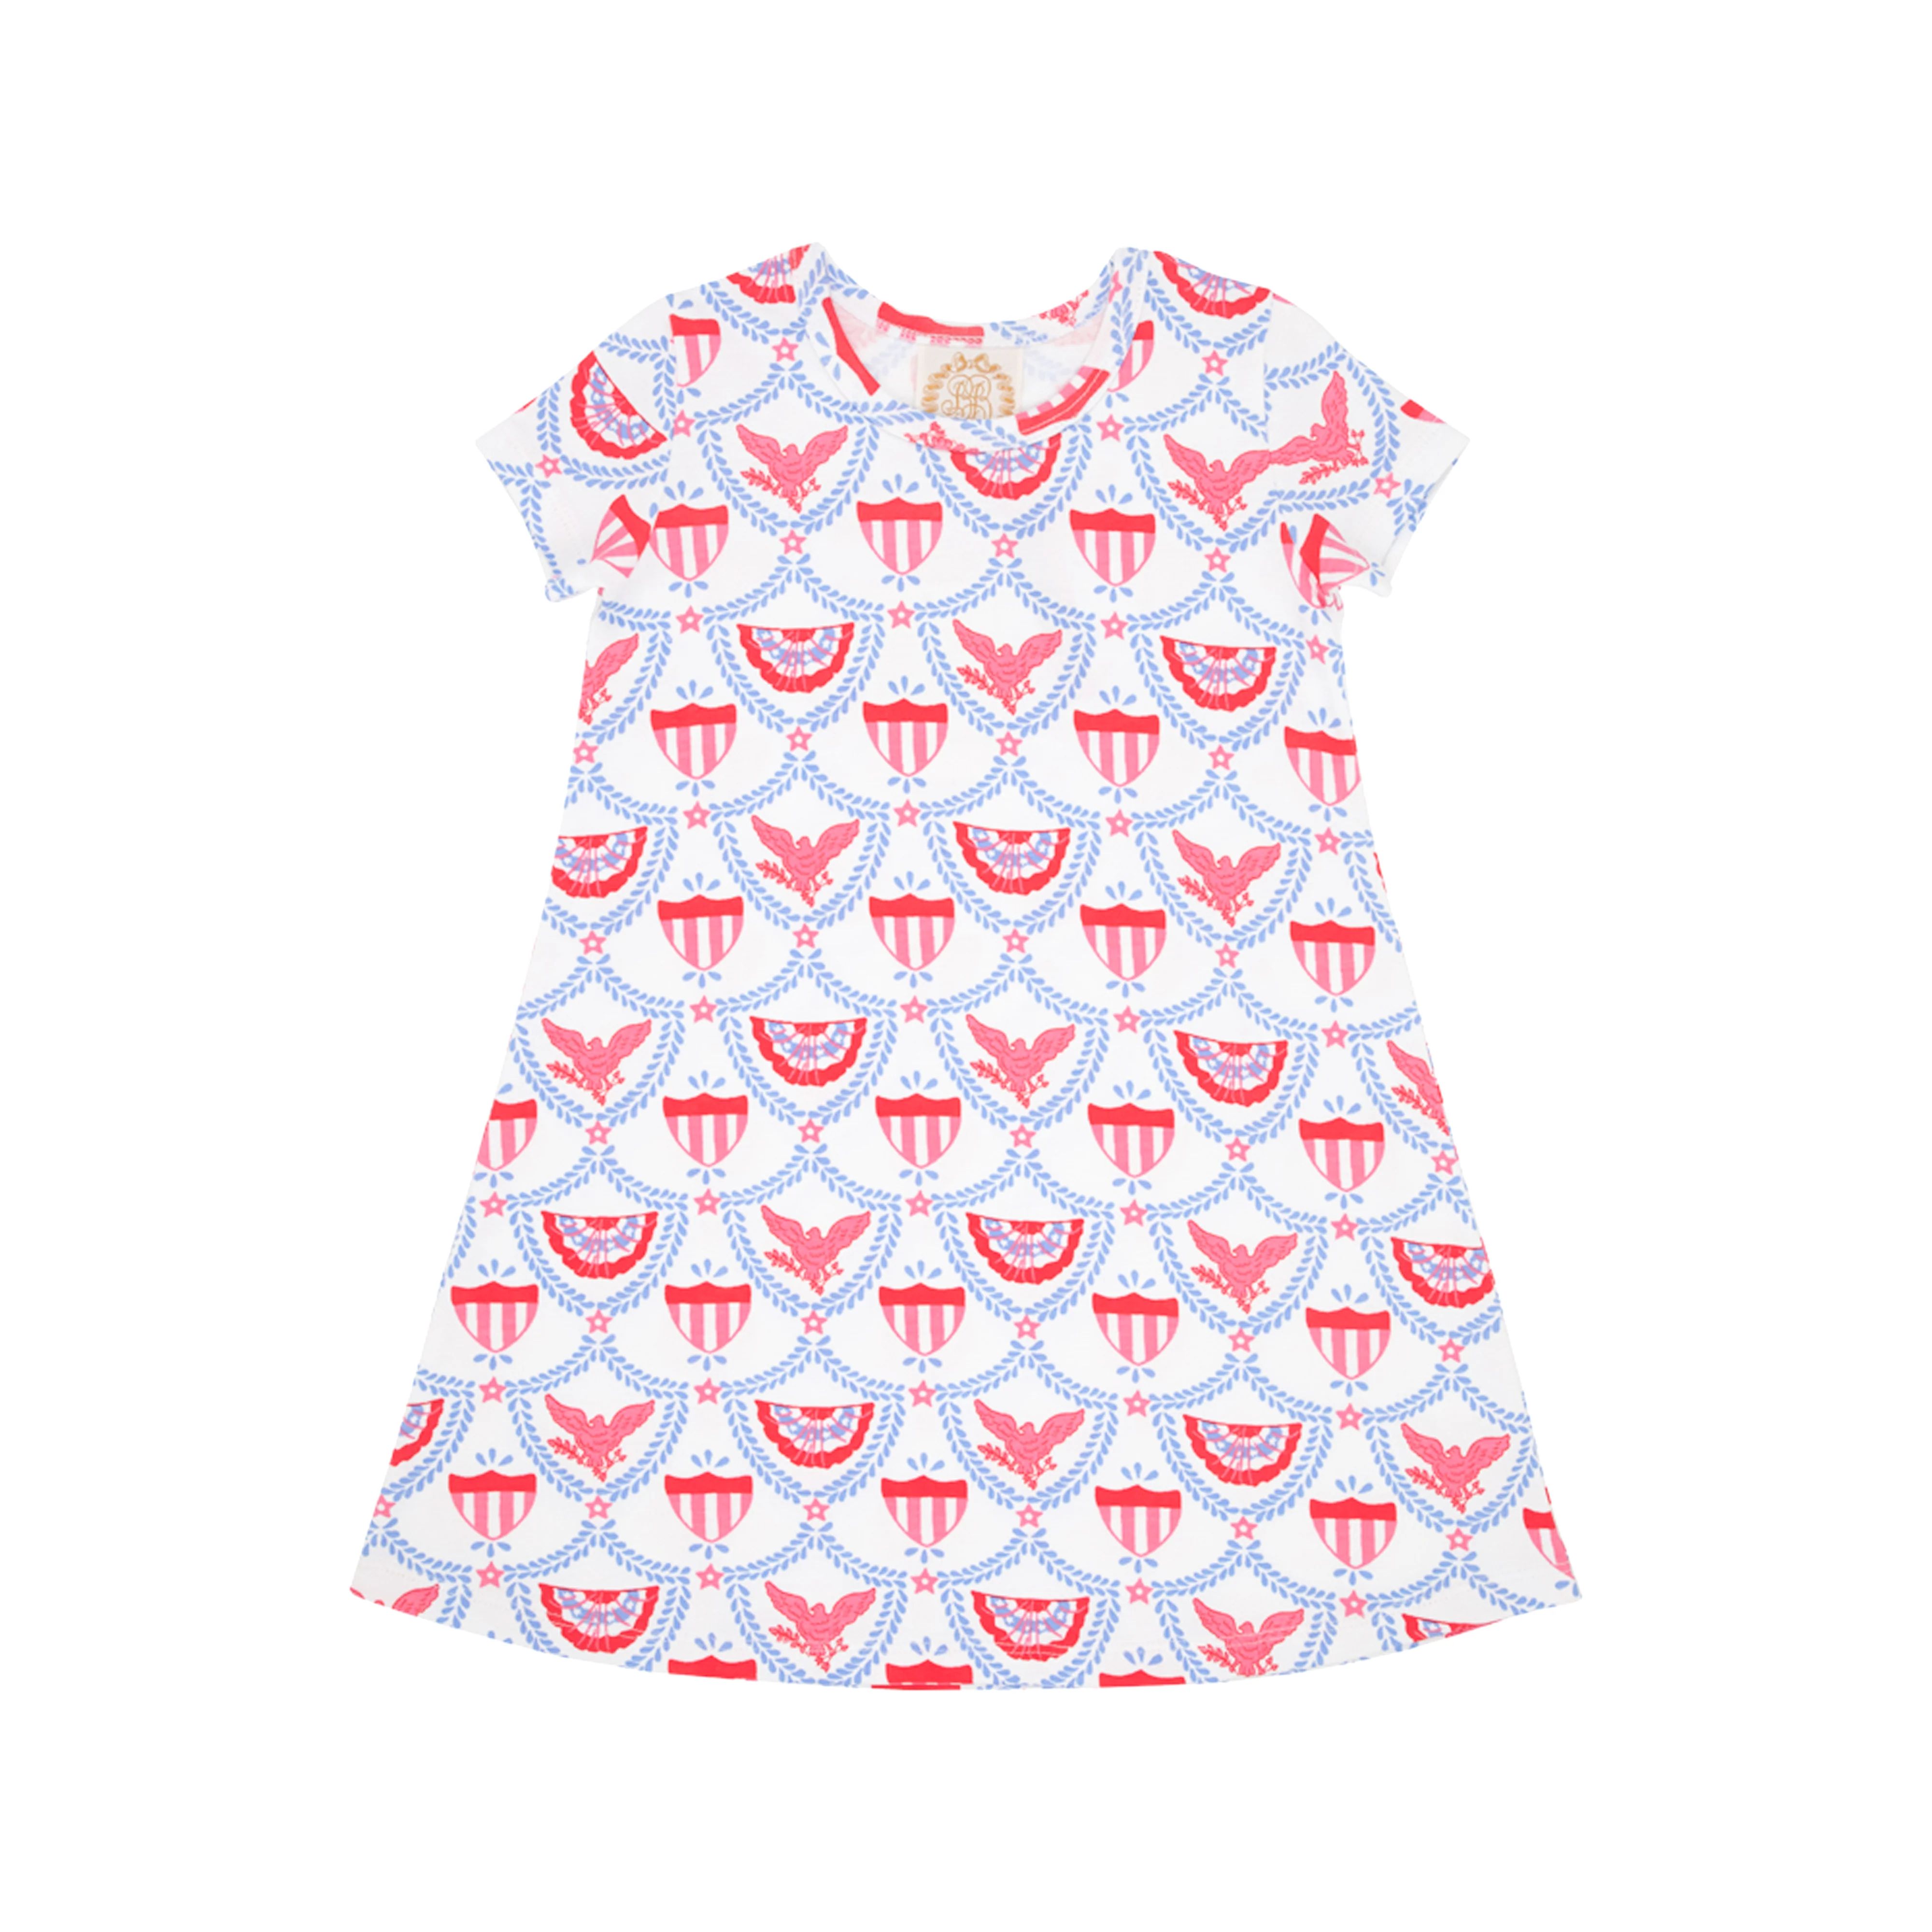 Polly Play Dress - American Swag | The Beaufort Bonnet Company